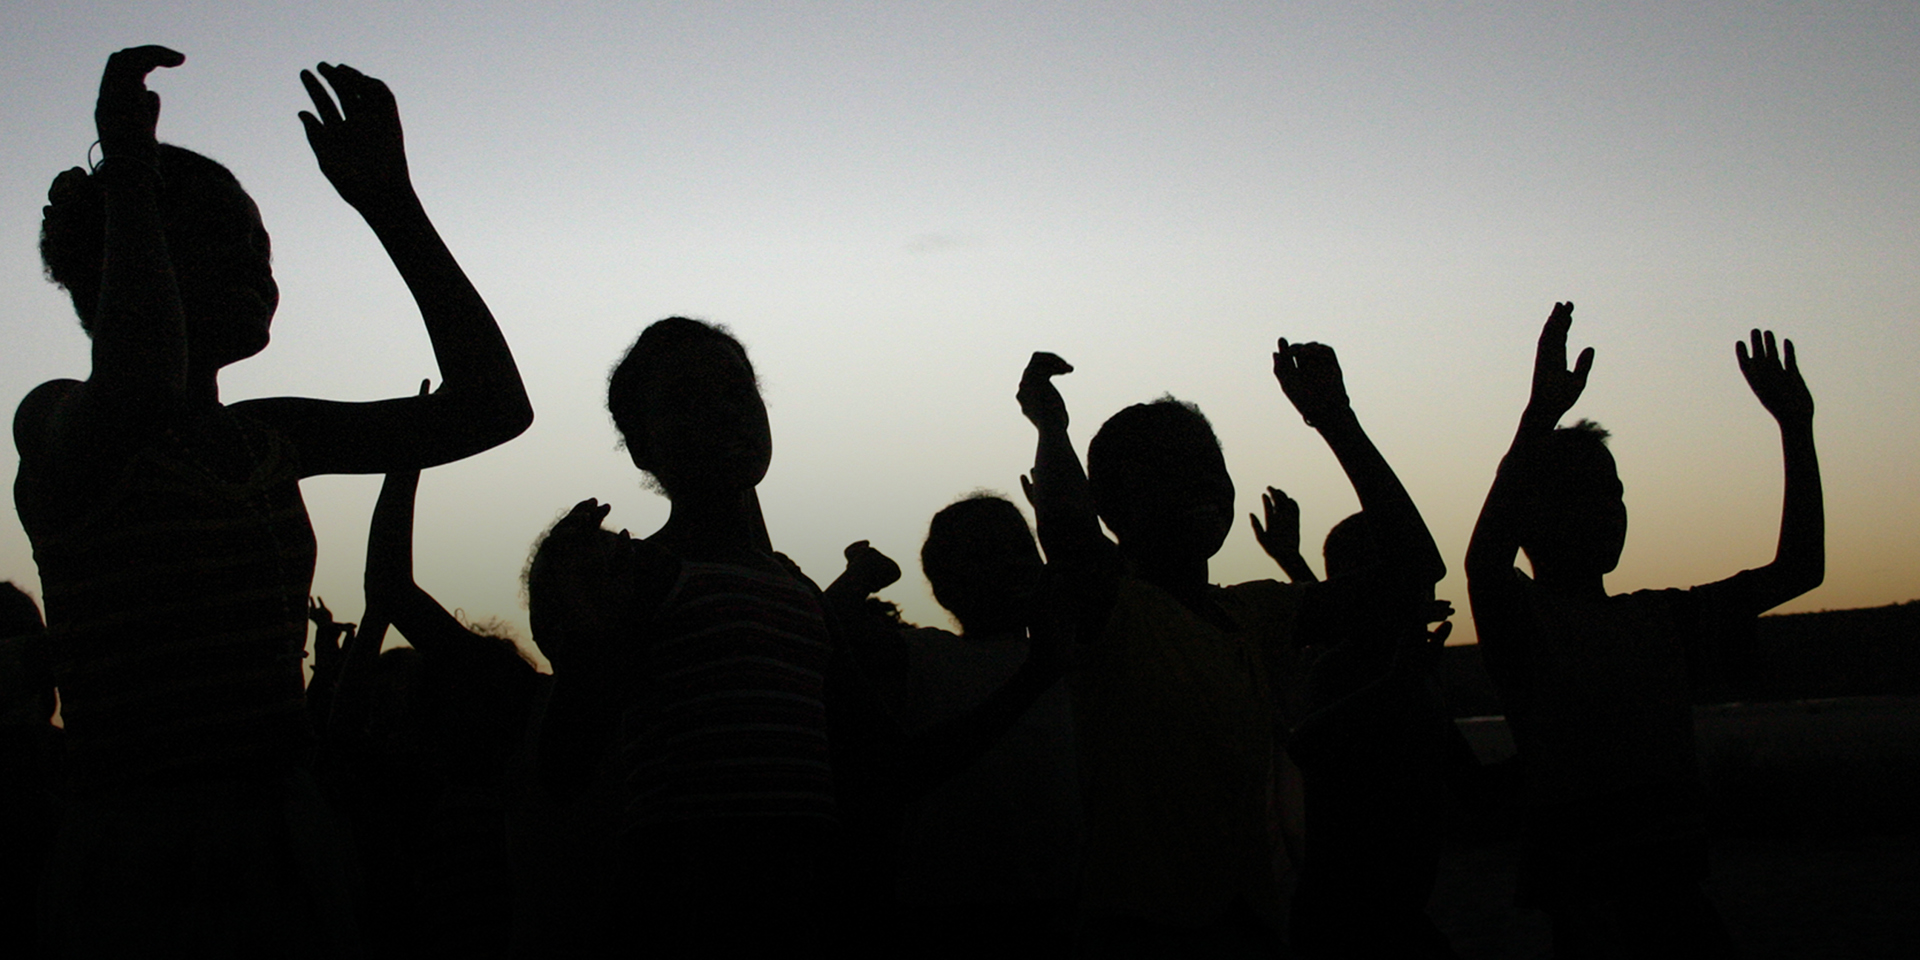 Image of several young people waving their arms as the sun sets.